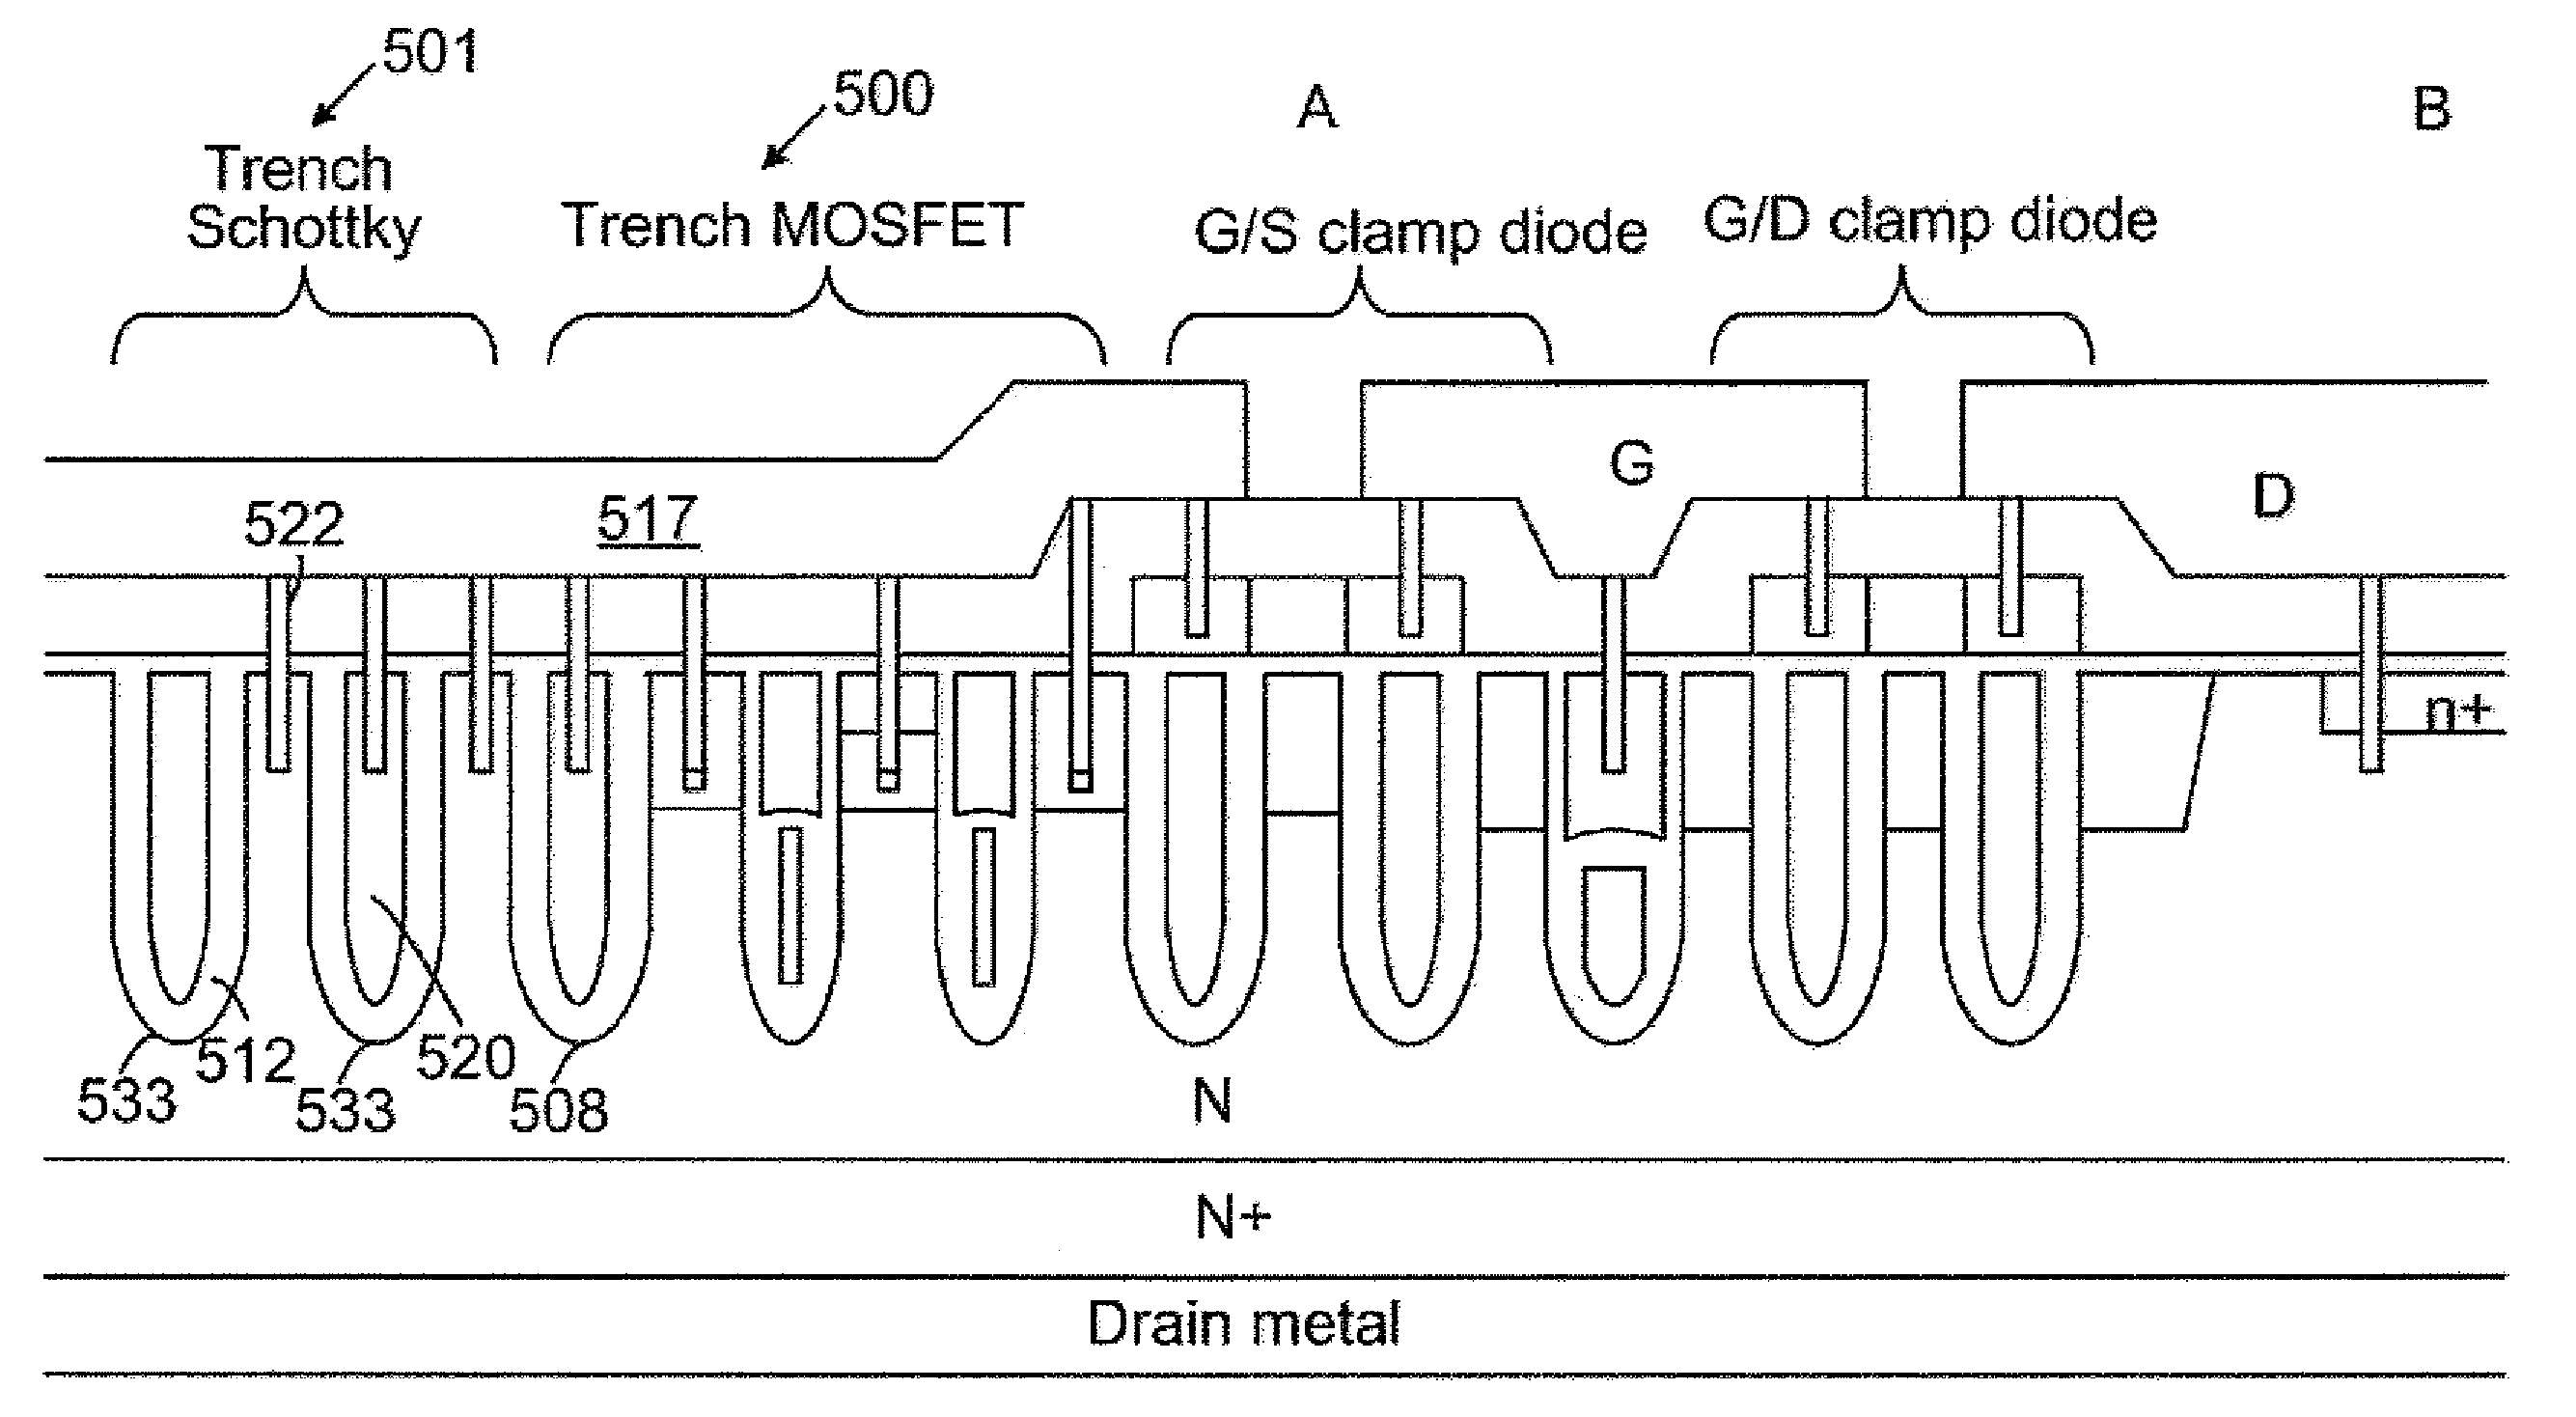 Shielded gate mosfet-schottky rectifier-diode integrated circuits with trenched contact structures